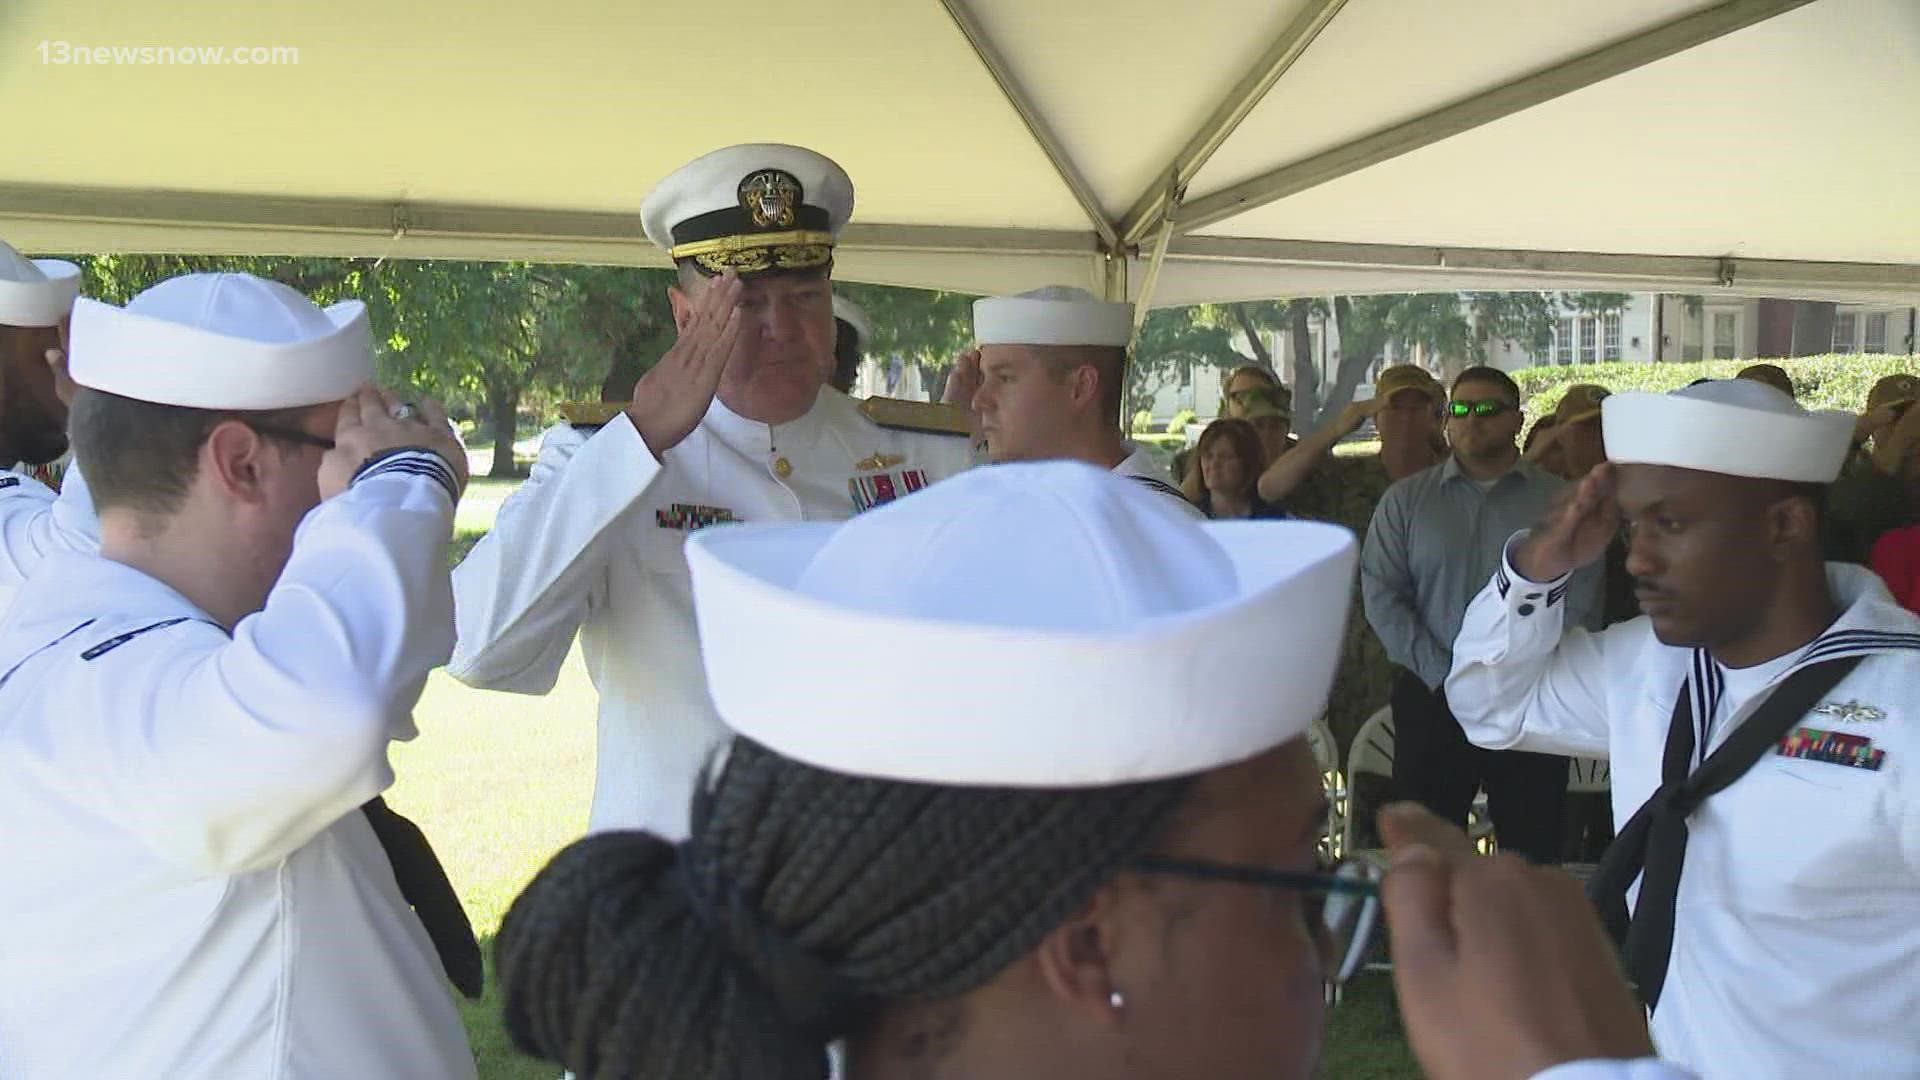 Rear Adm. Charles W. “Chip” Rock was relieved by Rear Adm. Scott Gray in a ceremony on Thursday.